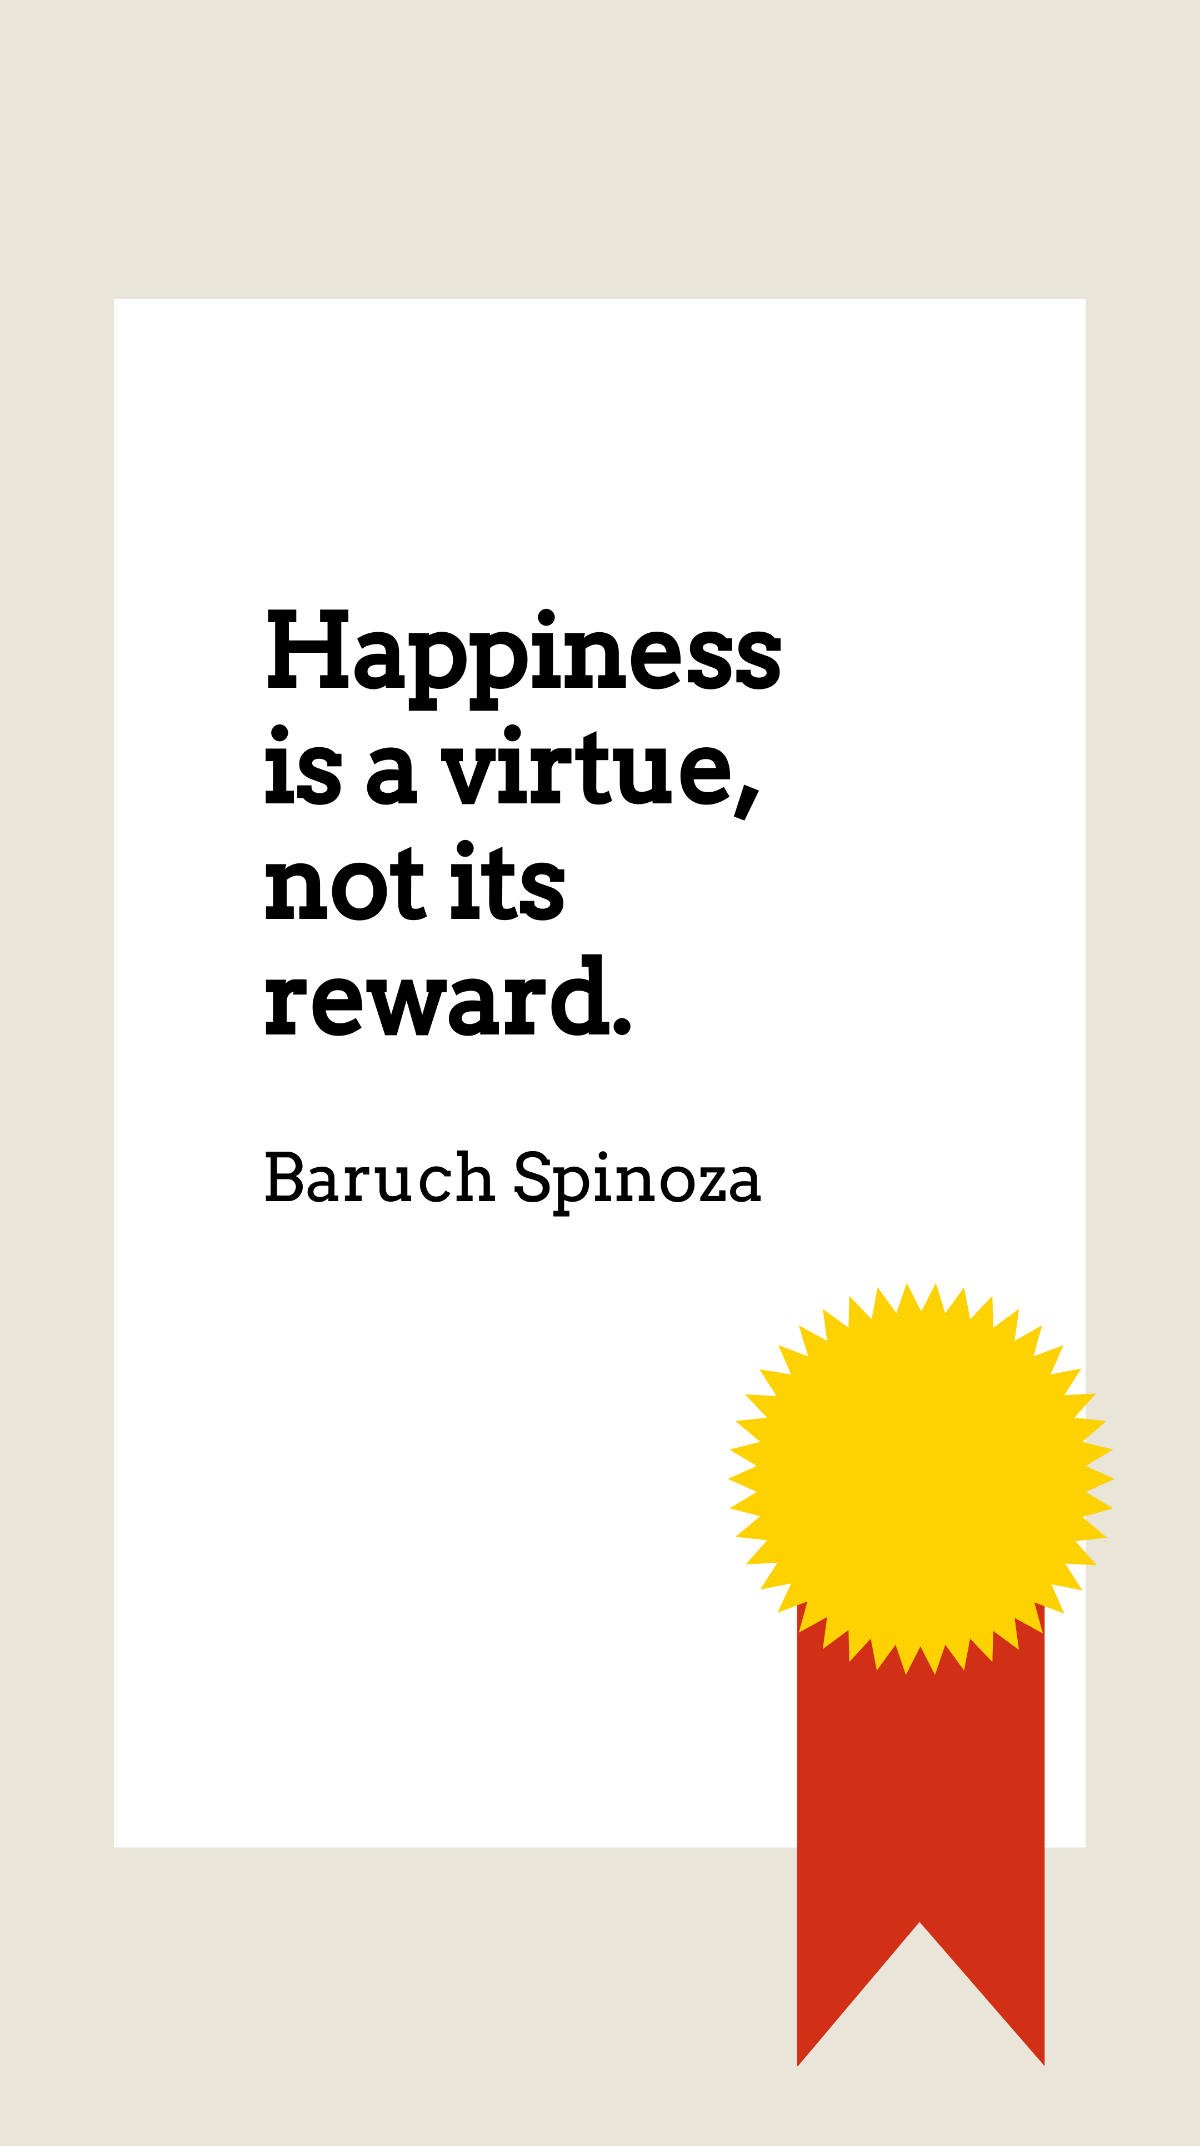 Baruch Spinoza - Happiness is a virtue, not its reward. Template